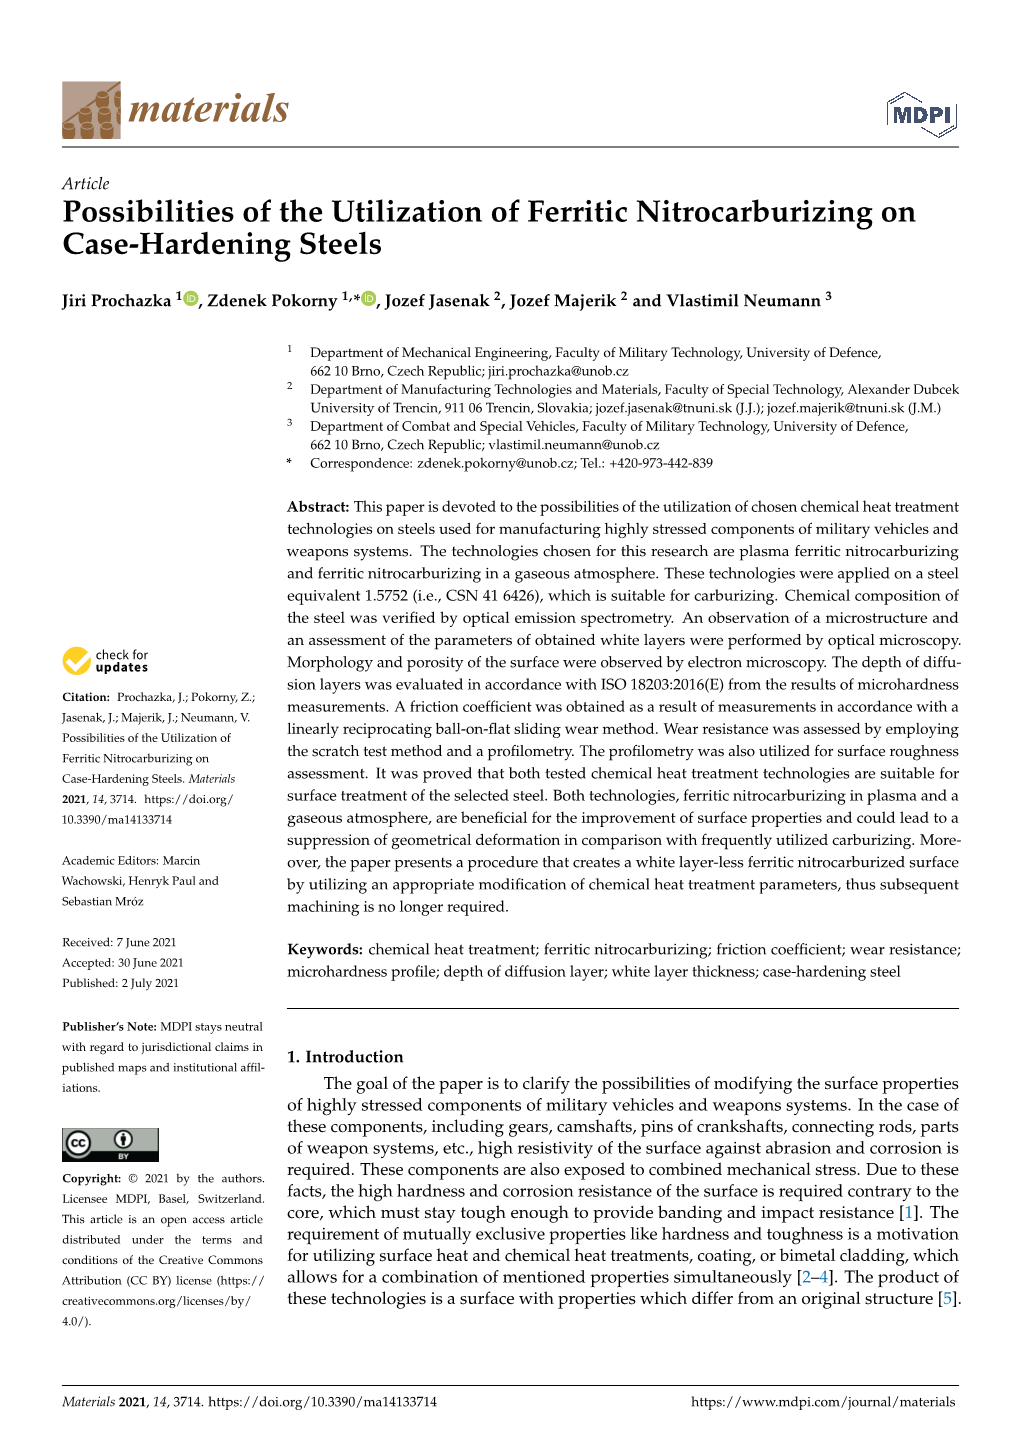 Possibilities of the Utilization of Ferritic Nitrocarburizing on Case-Hardening Steels